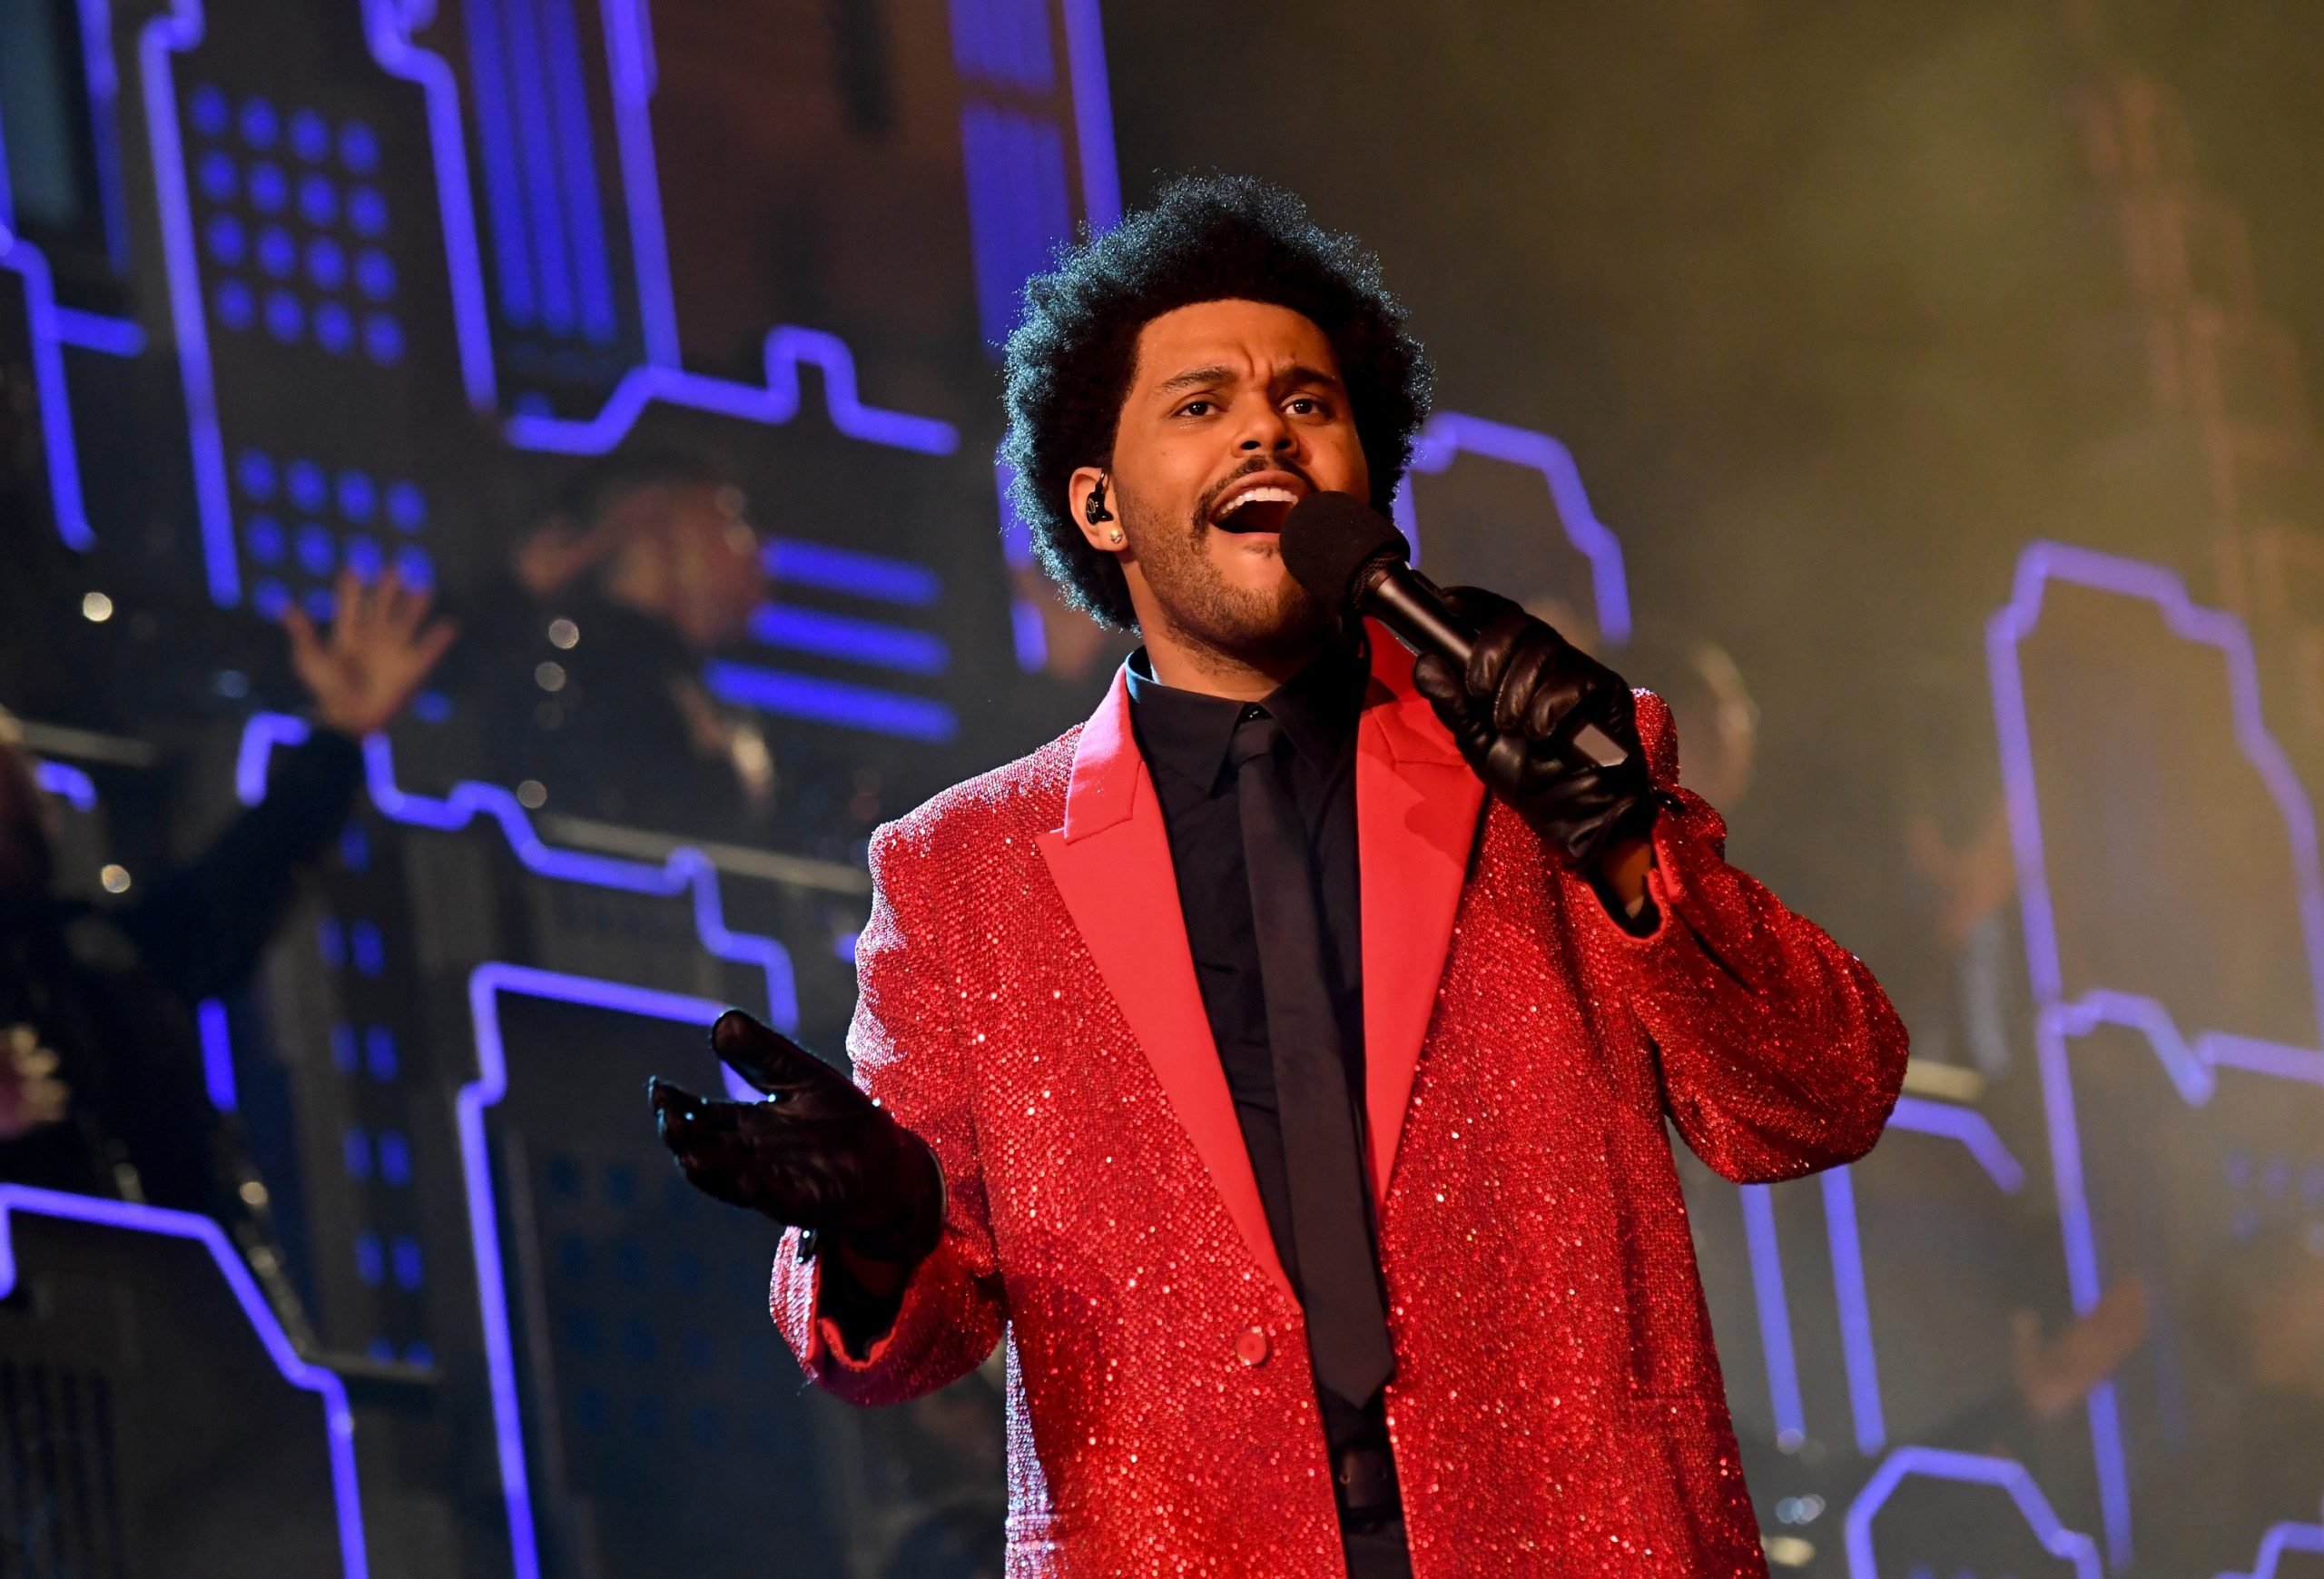 Did The Weeknd Lip Sync the Super Bowl Halftime Show?